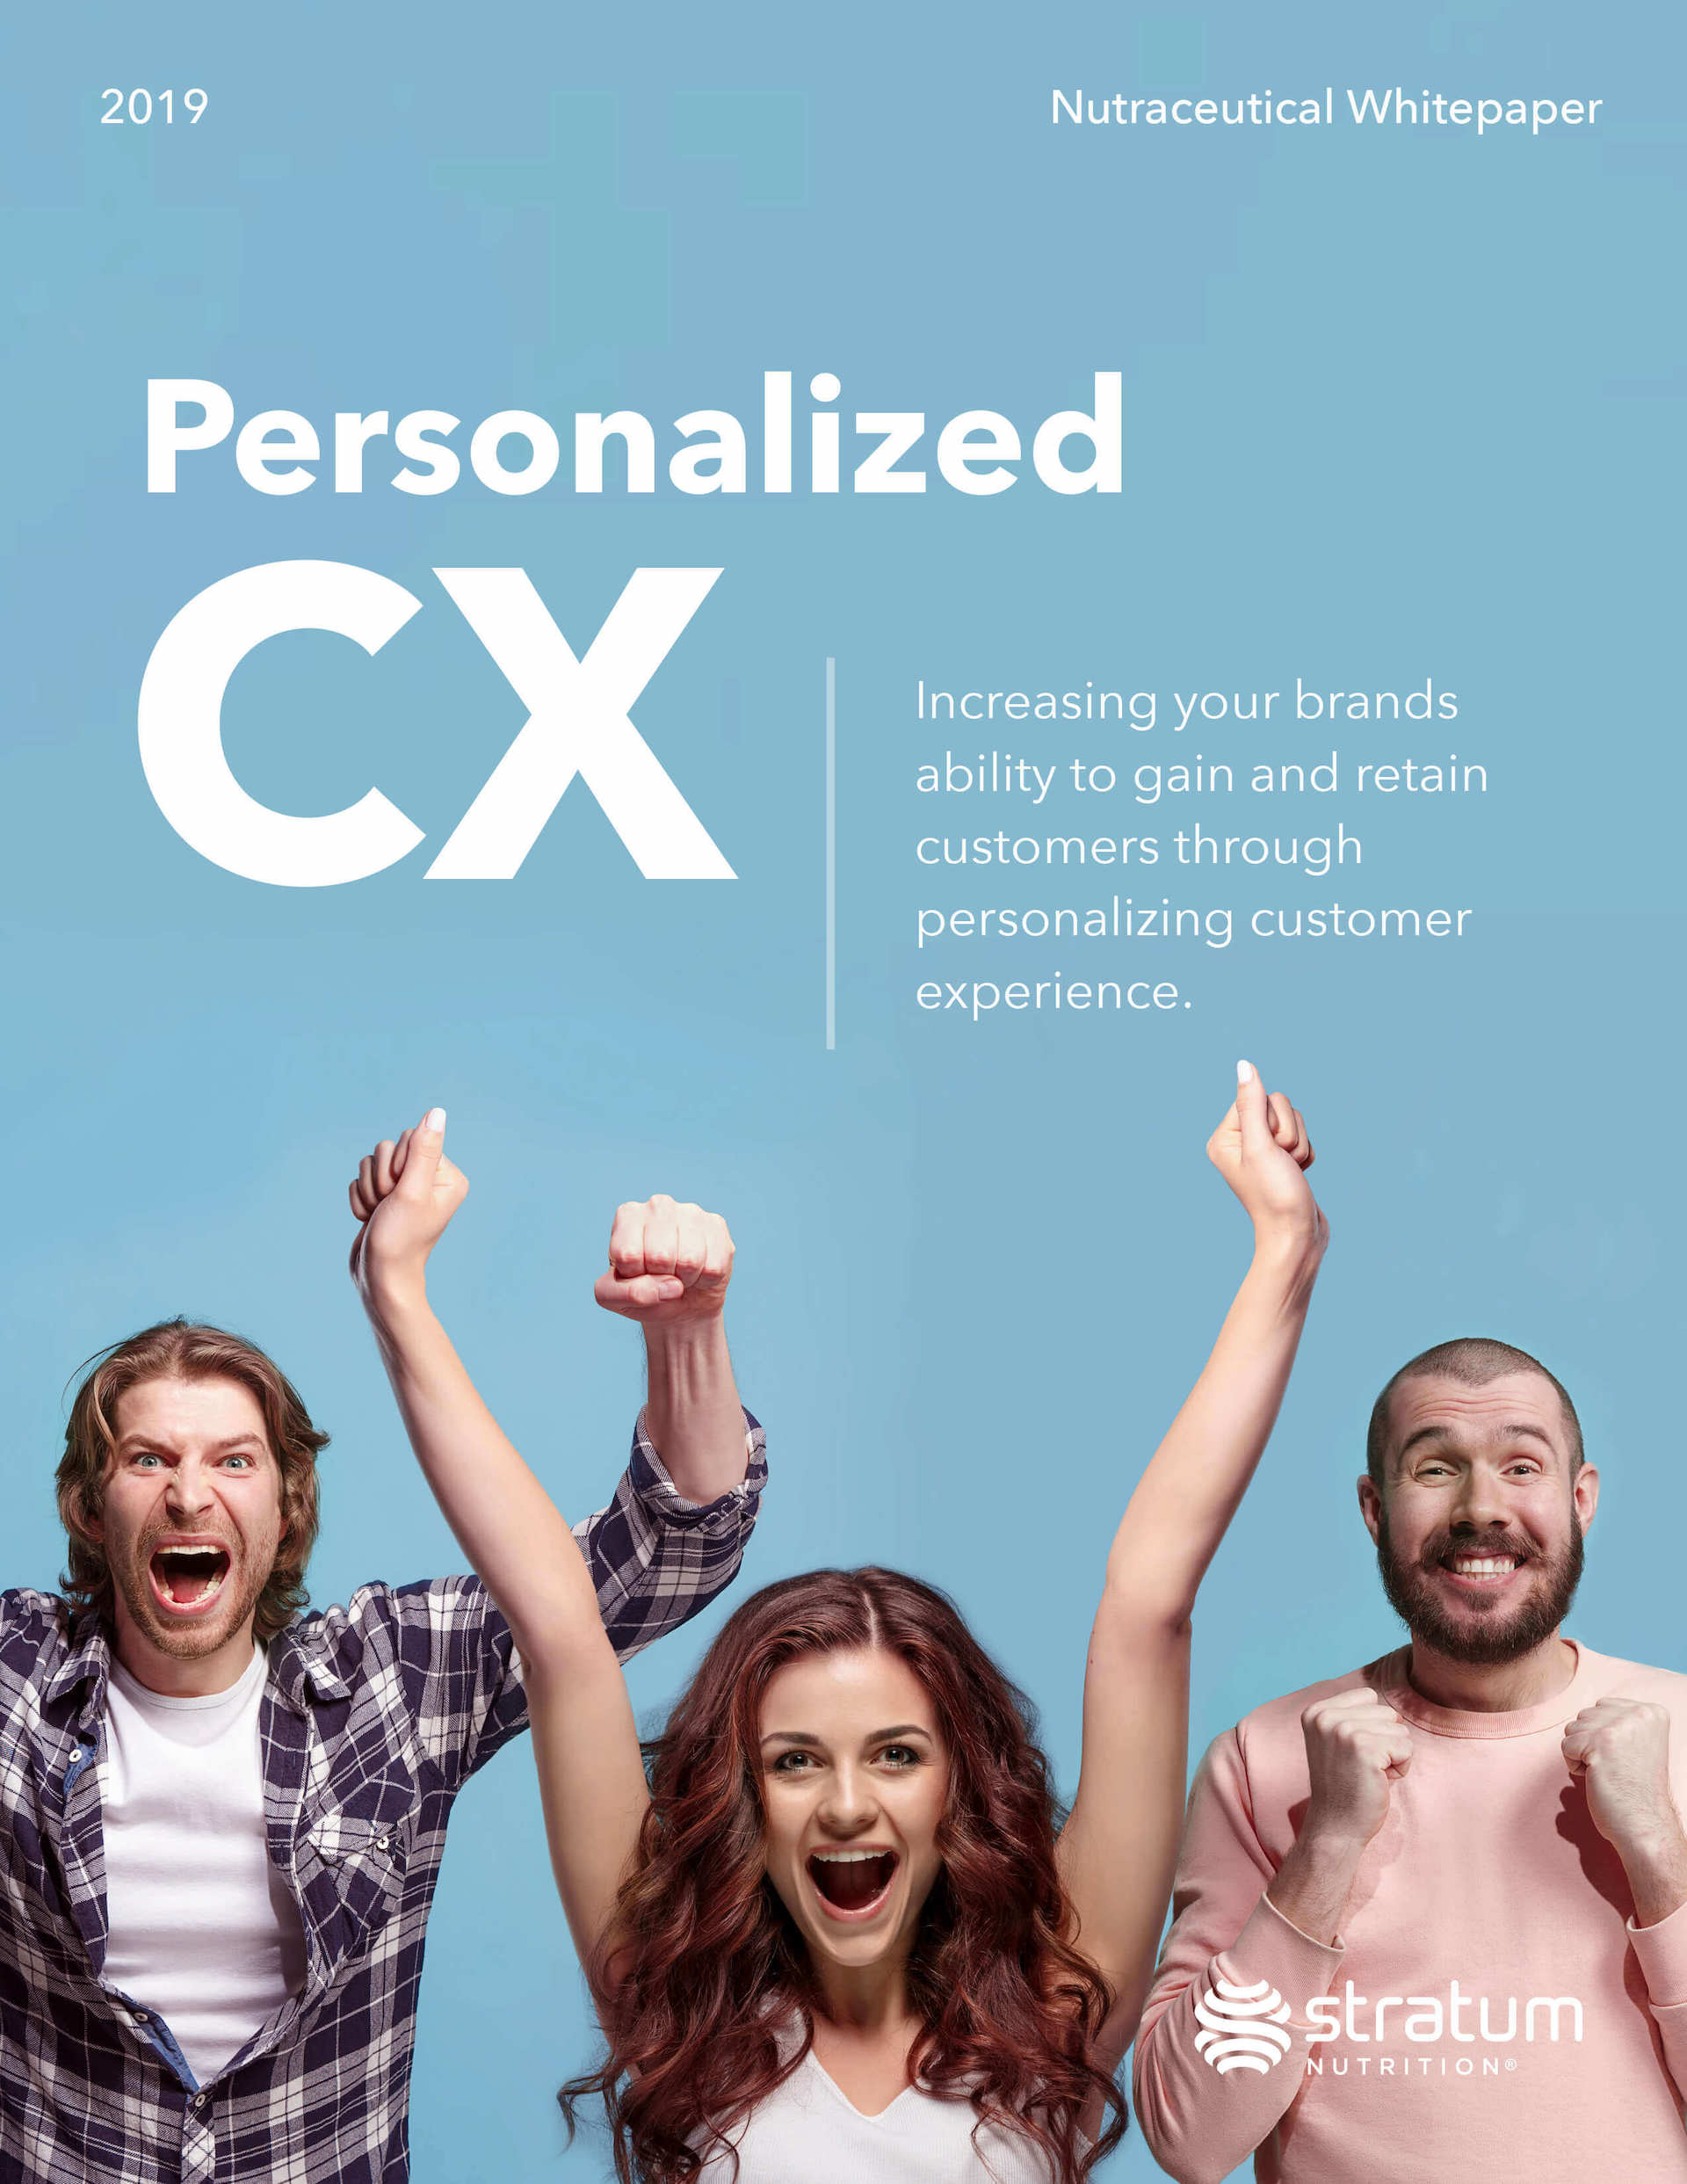 Personalized CX blog image